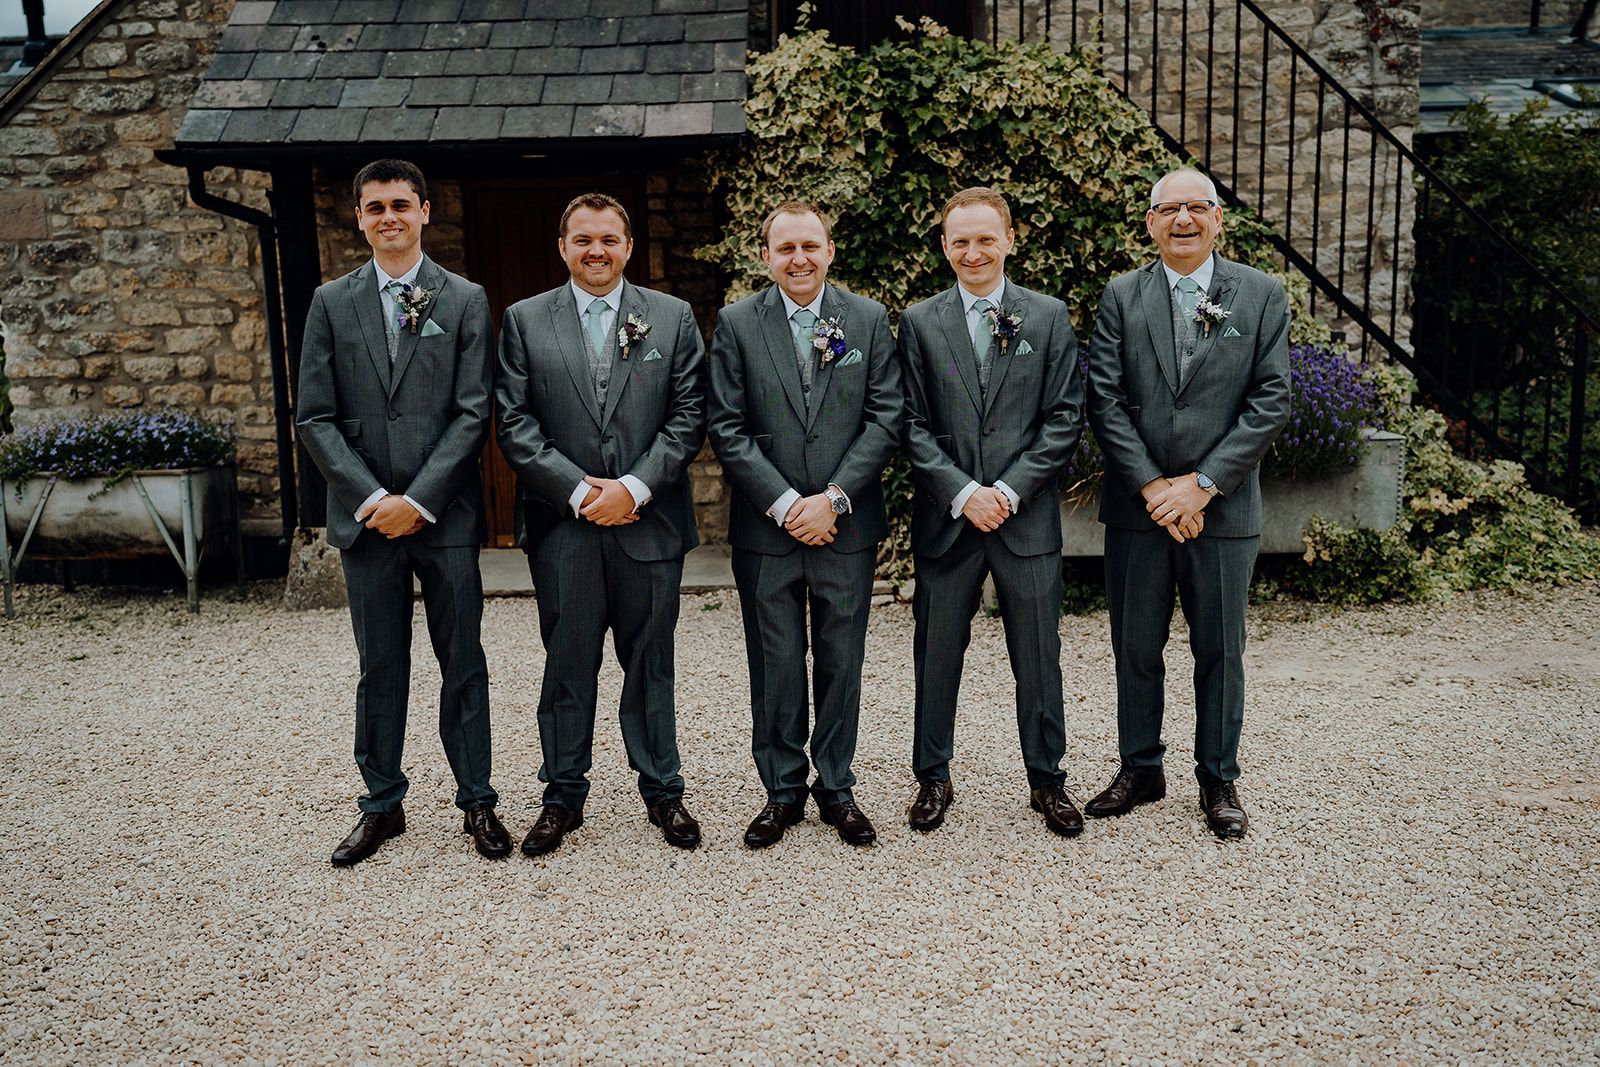 James standing with his groomsmen in the courtyard of Huntsmill Farm in their suits and blue ties. Photo thanks to Sam and Steve Photography.